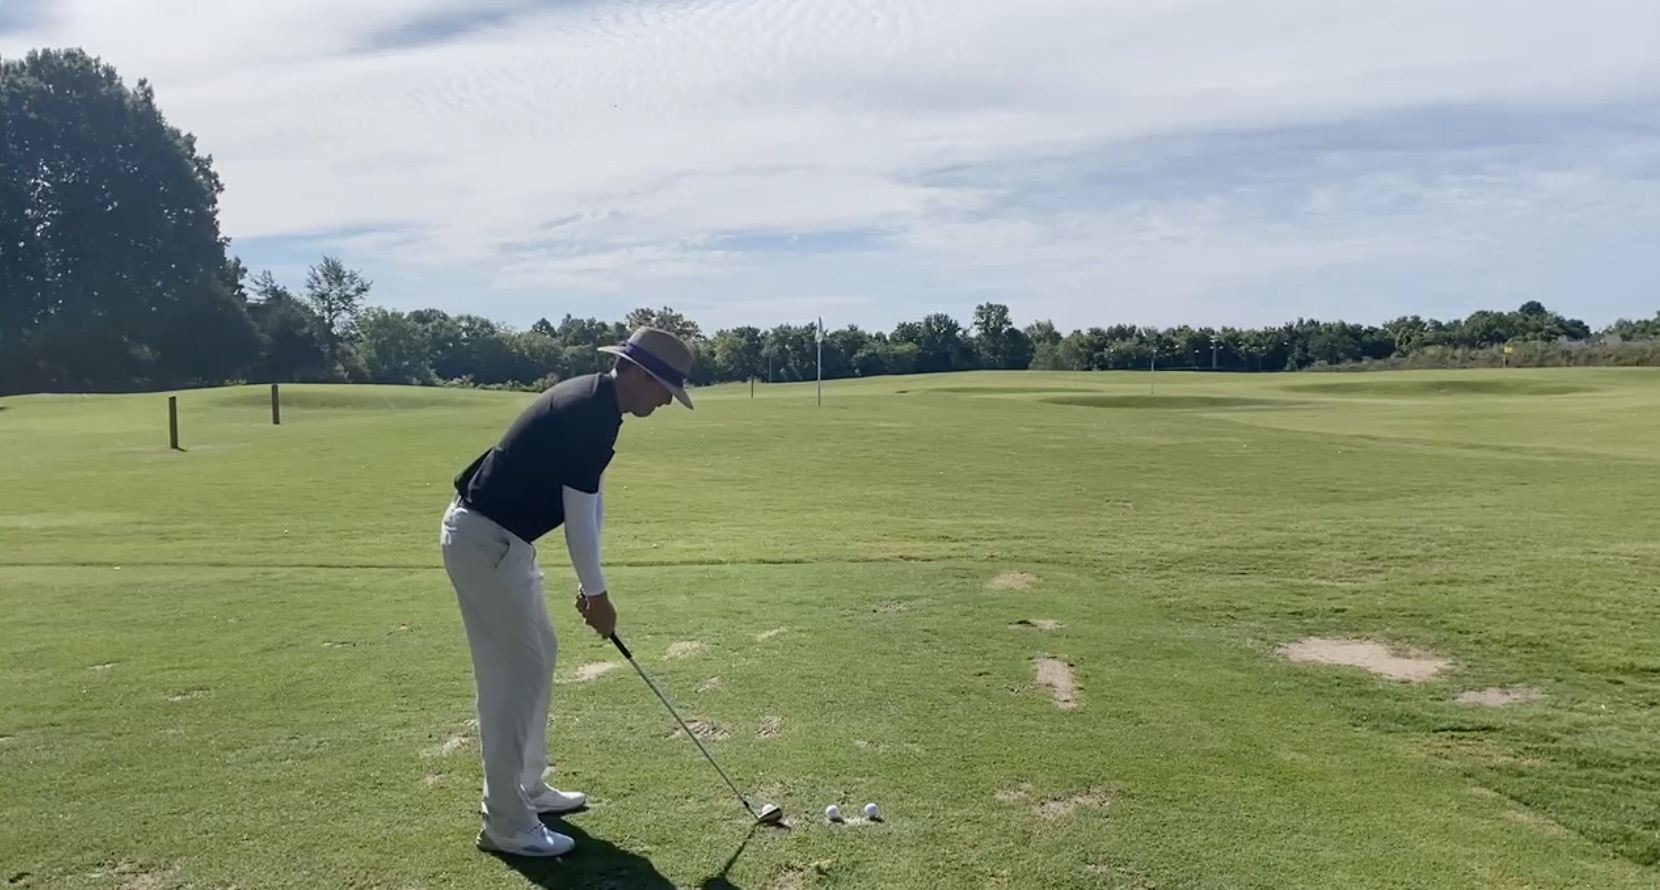 A Great Challenge Drill To Improve Your Contact